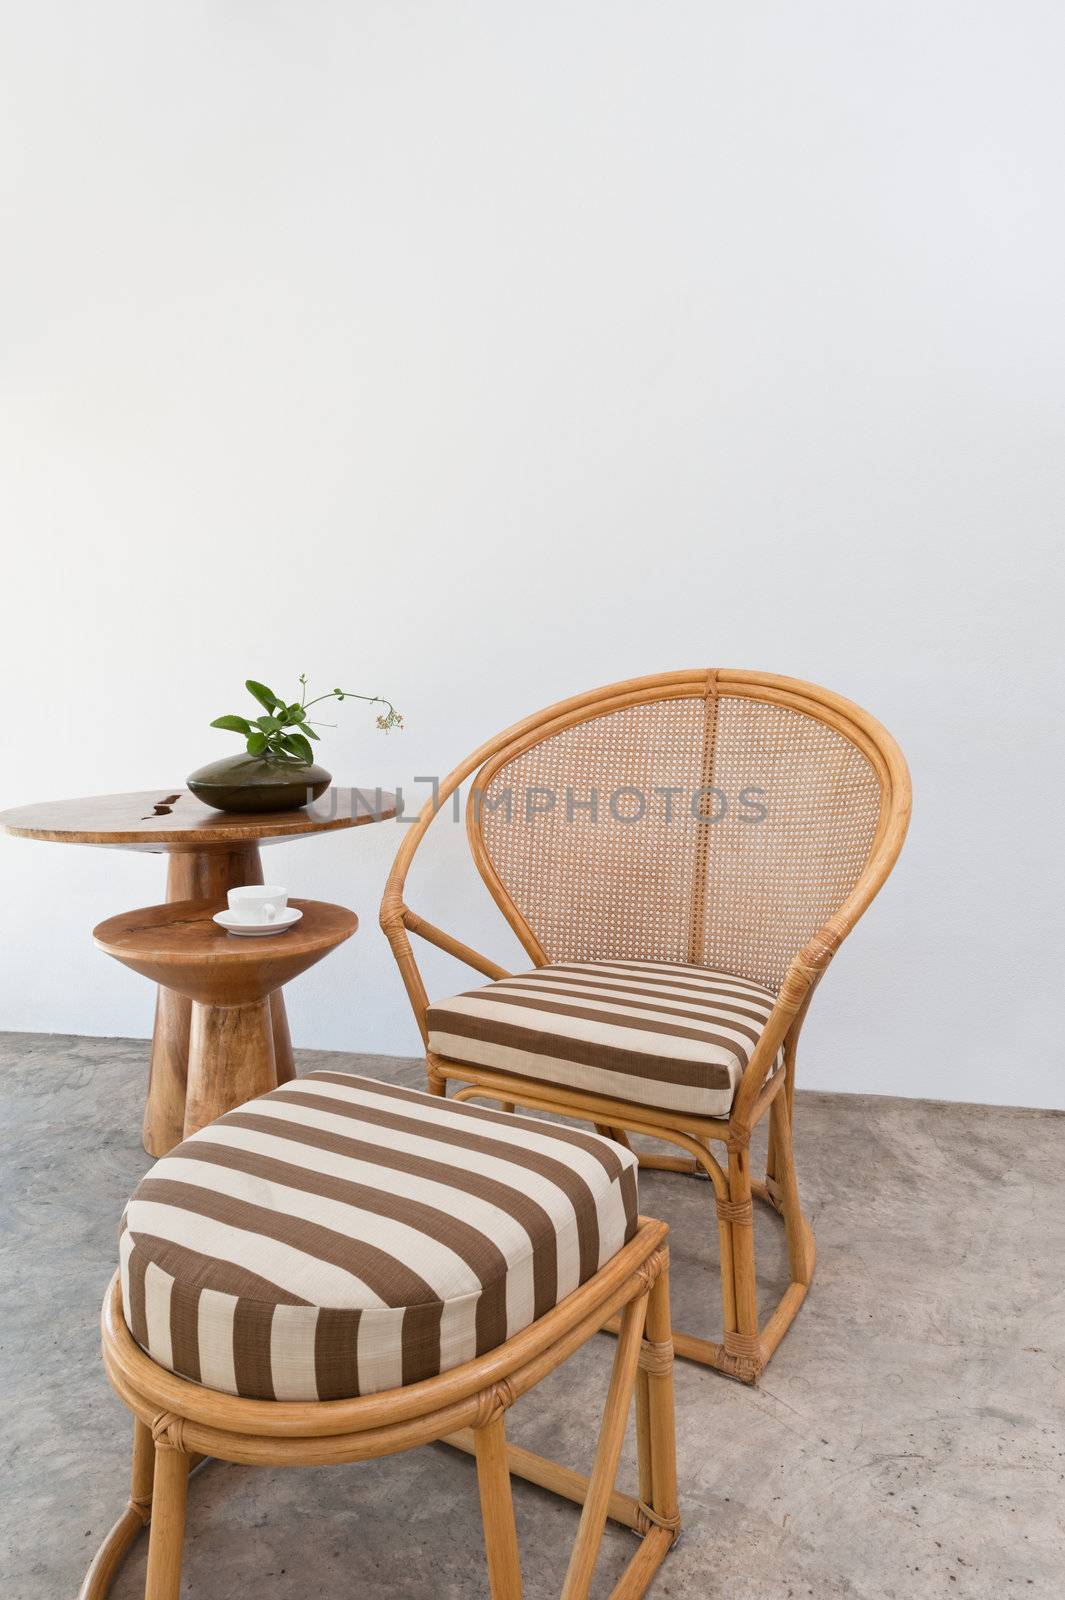 Beautiful beige bamboo rattan furniture in front of a white wall